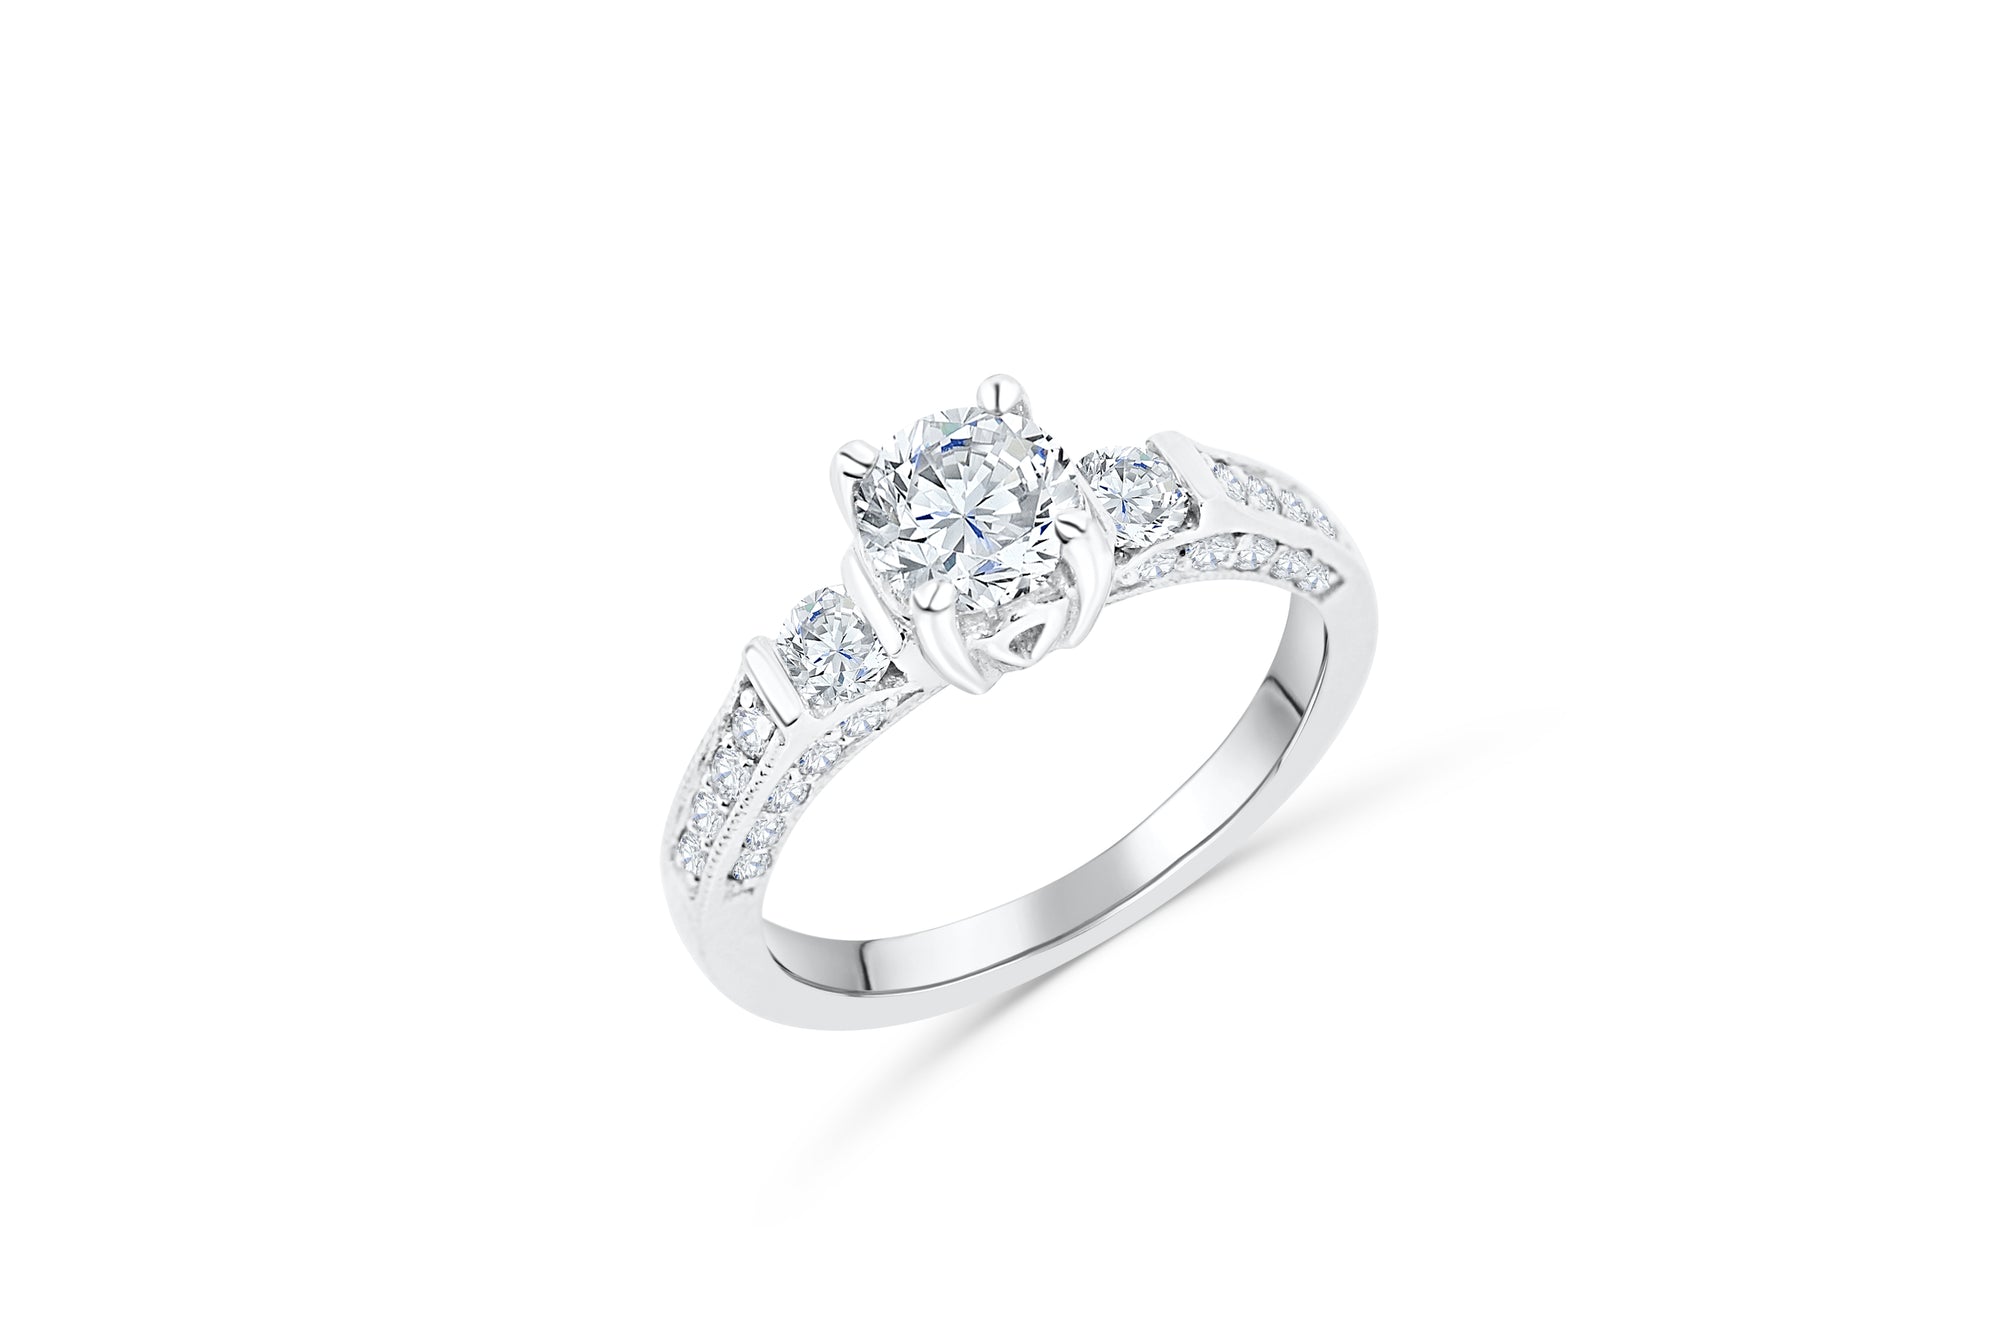 Diamond Engagement Ring 1.37 ct tw 14K White Gold DENG037 - NorthandSouthJewelry